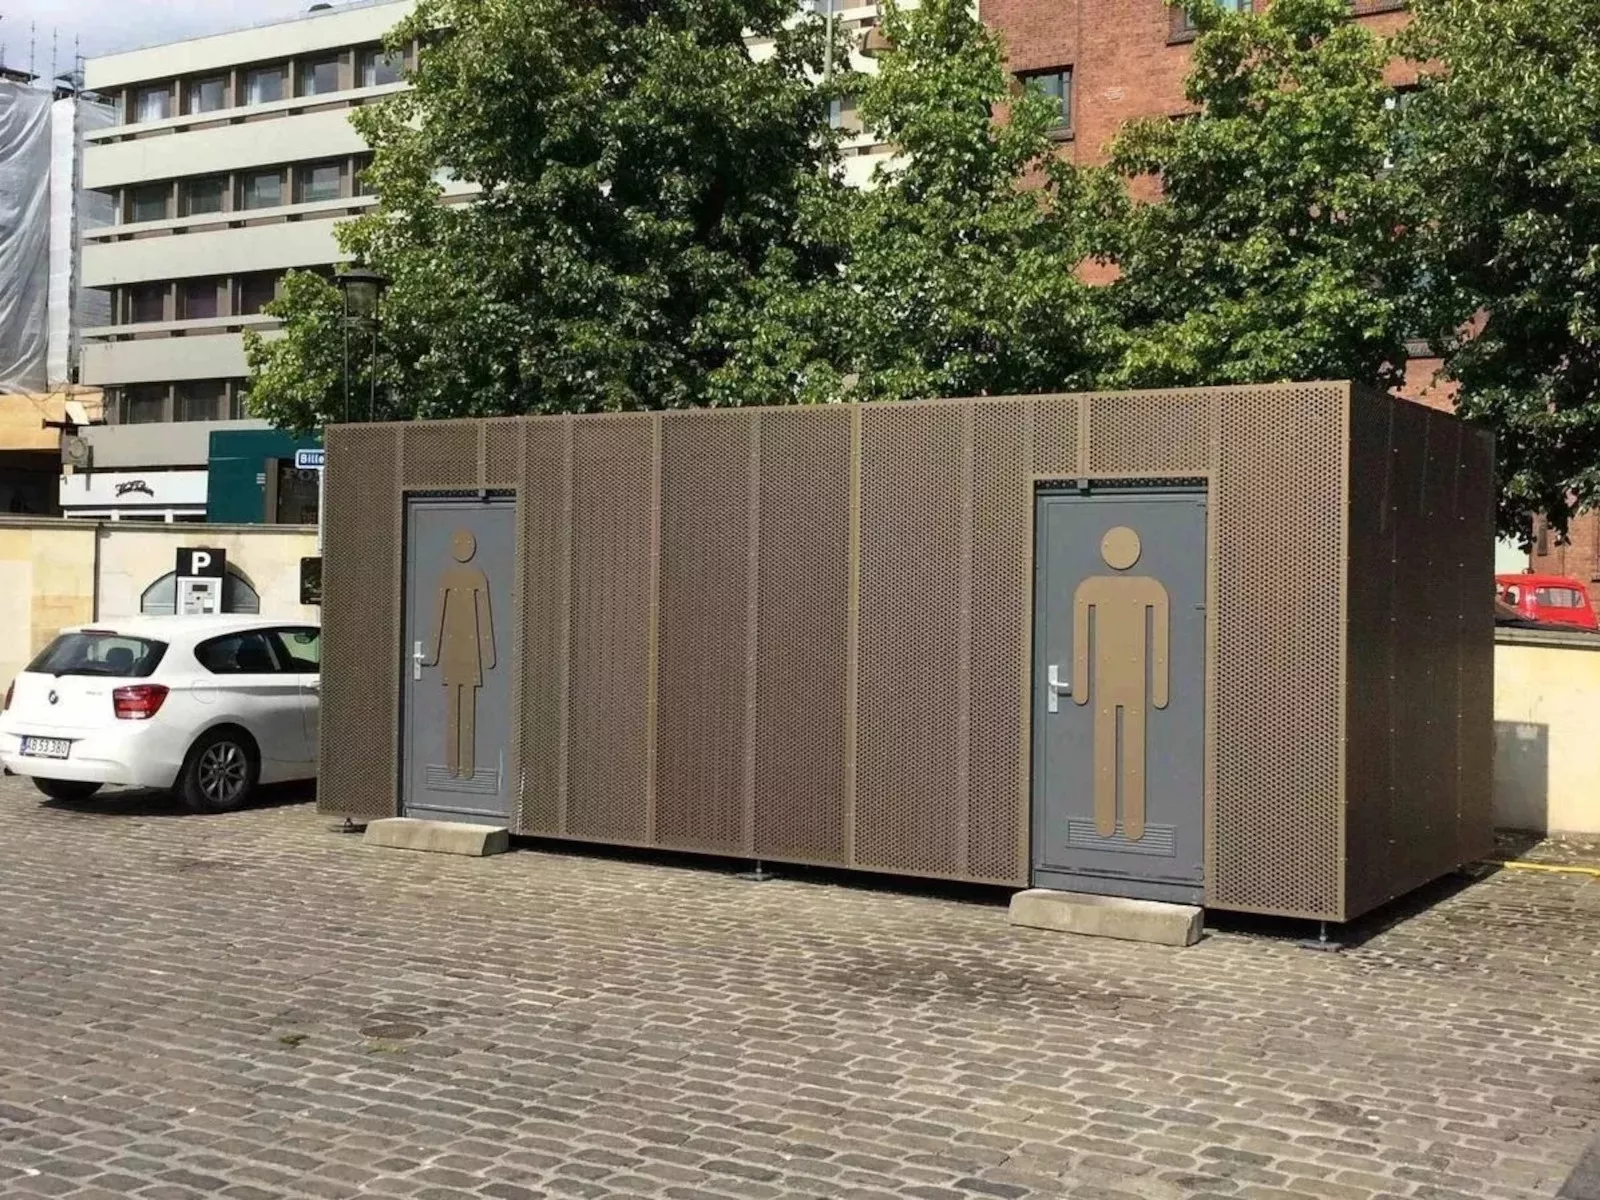  Sanitary facilities and changing rooms